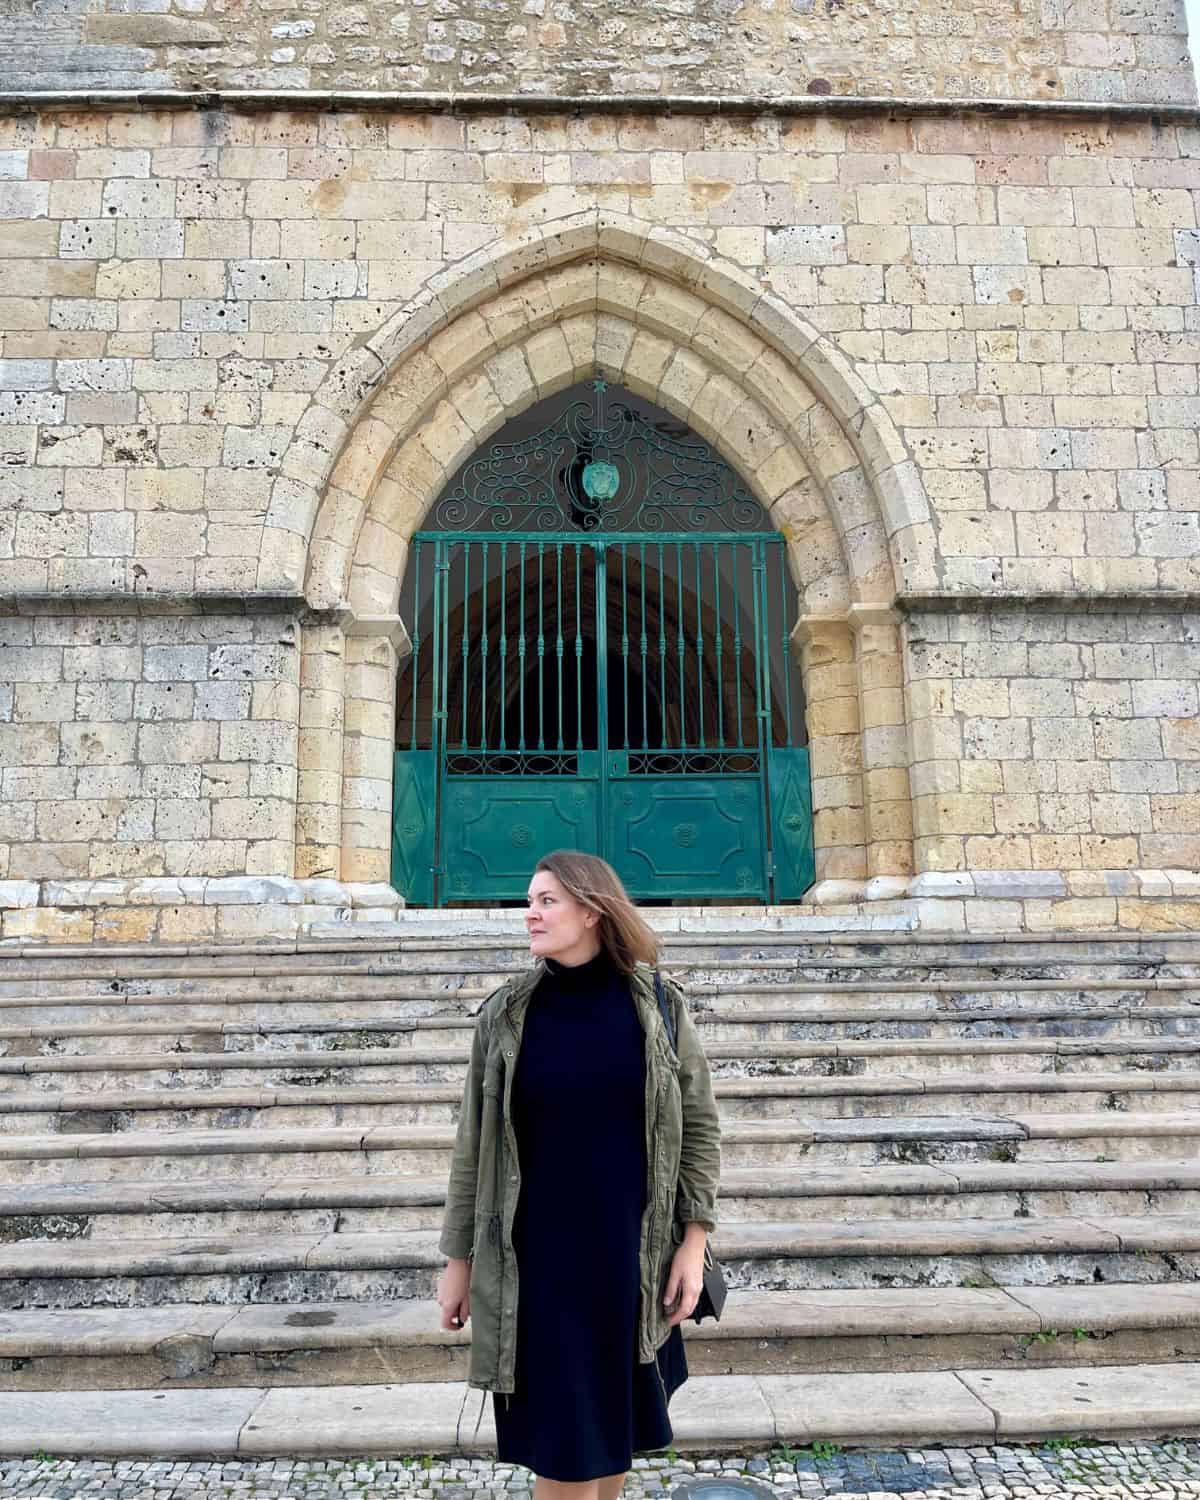 The solo female traveler, wearing a black dress and green jacket, stands on stone steps in front of a large green metal door set within an ornate stone archway, indicative of historical architecture.